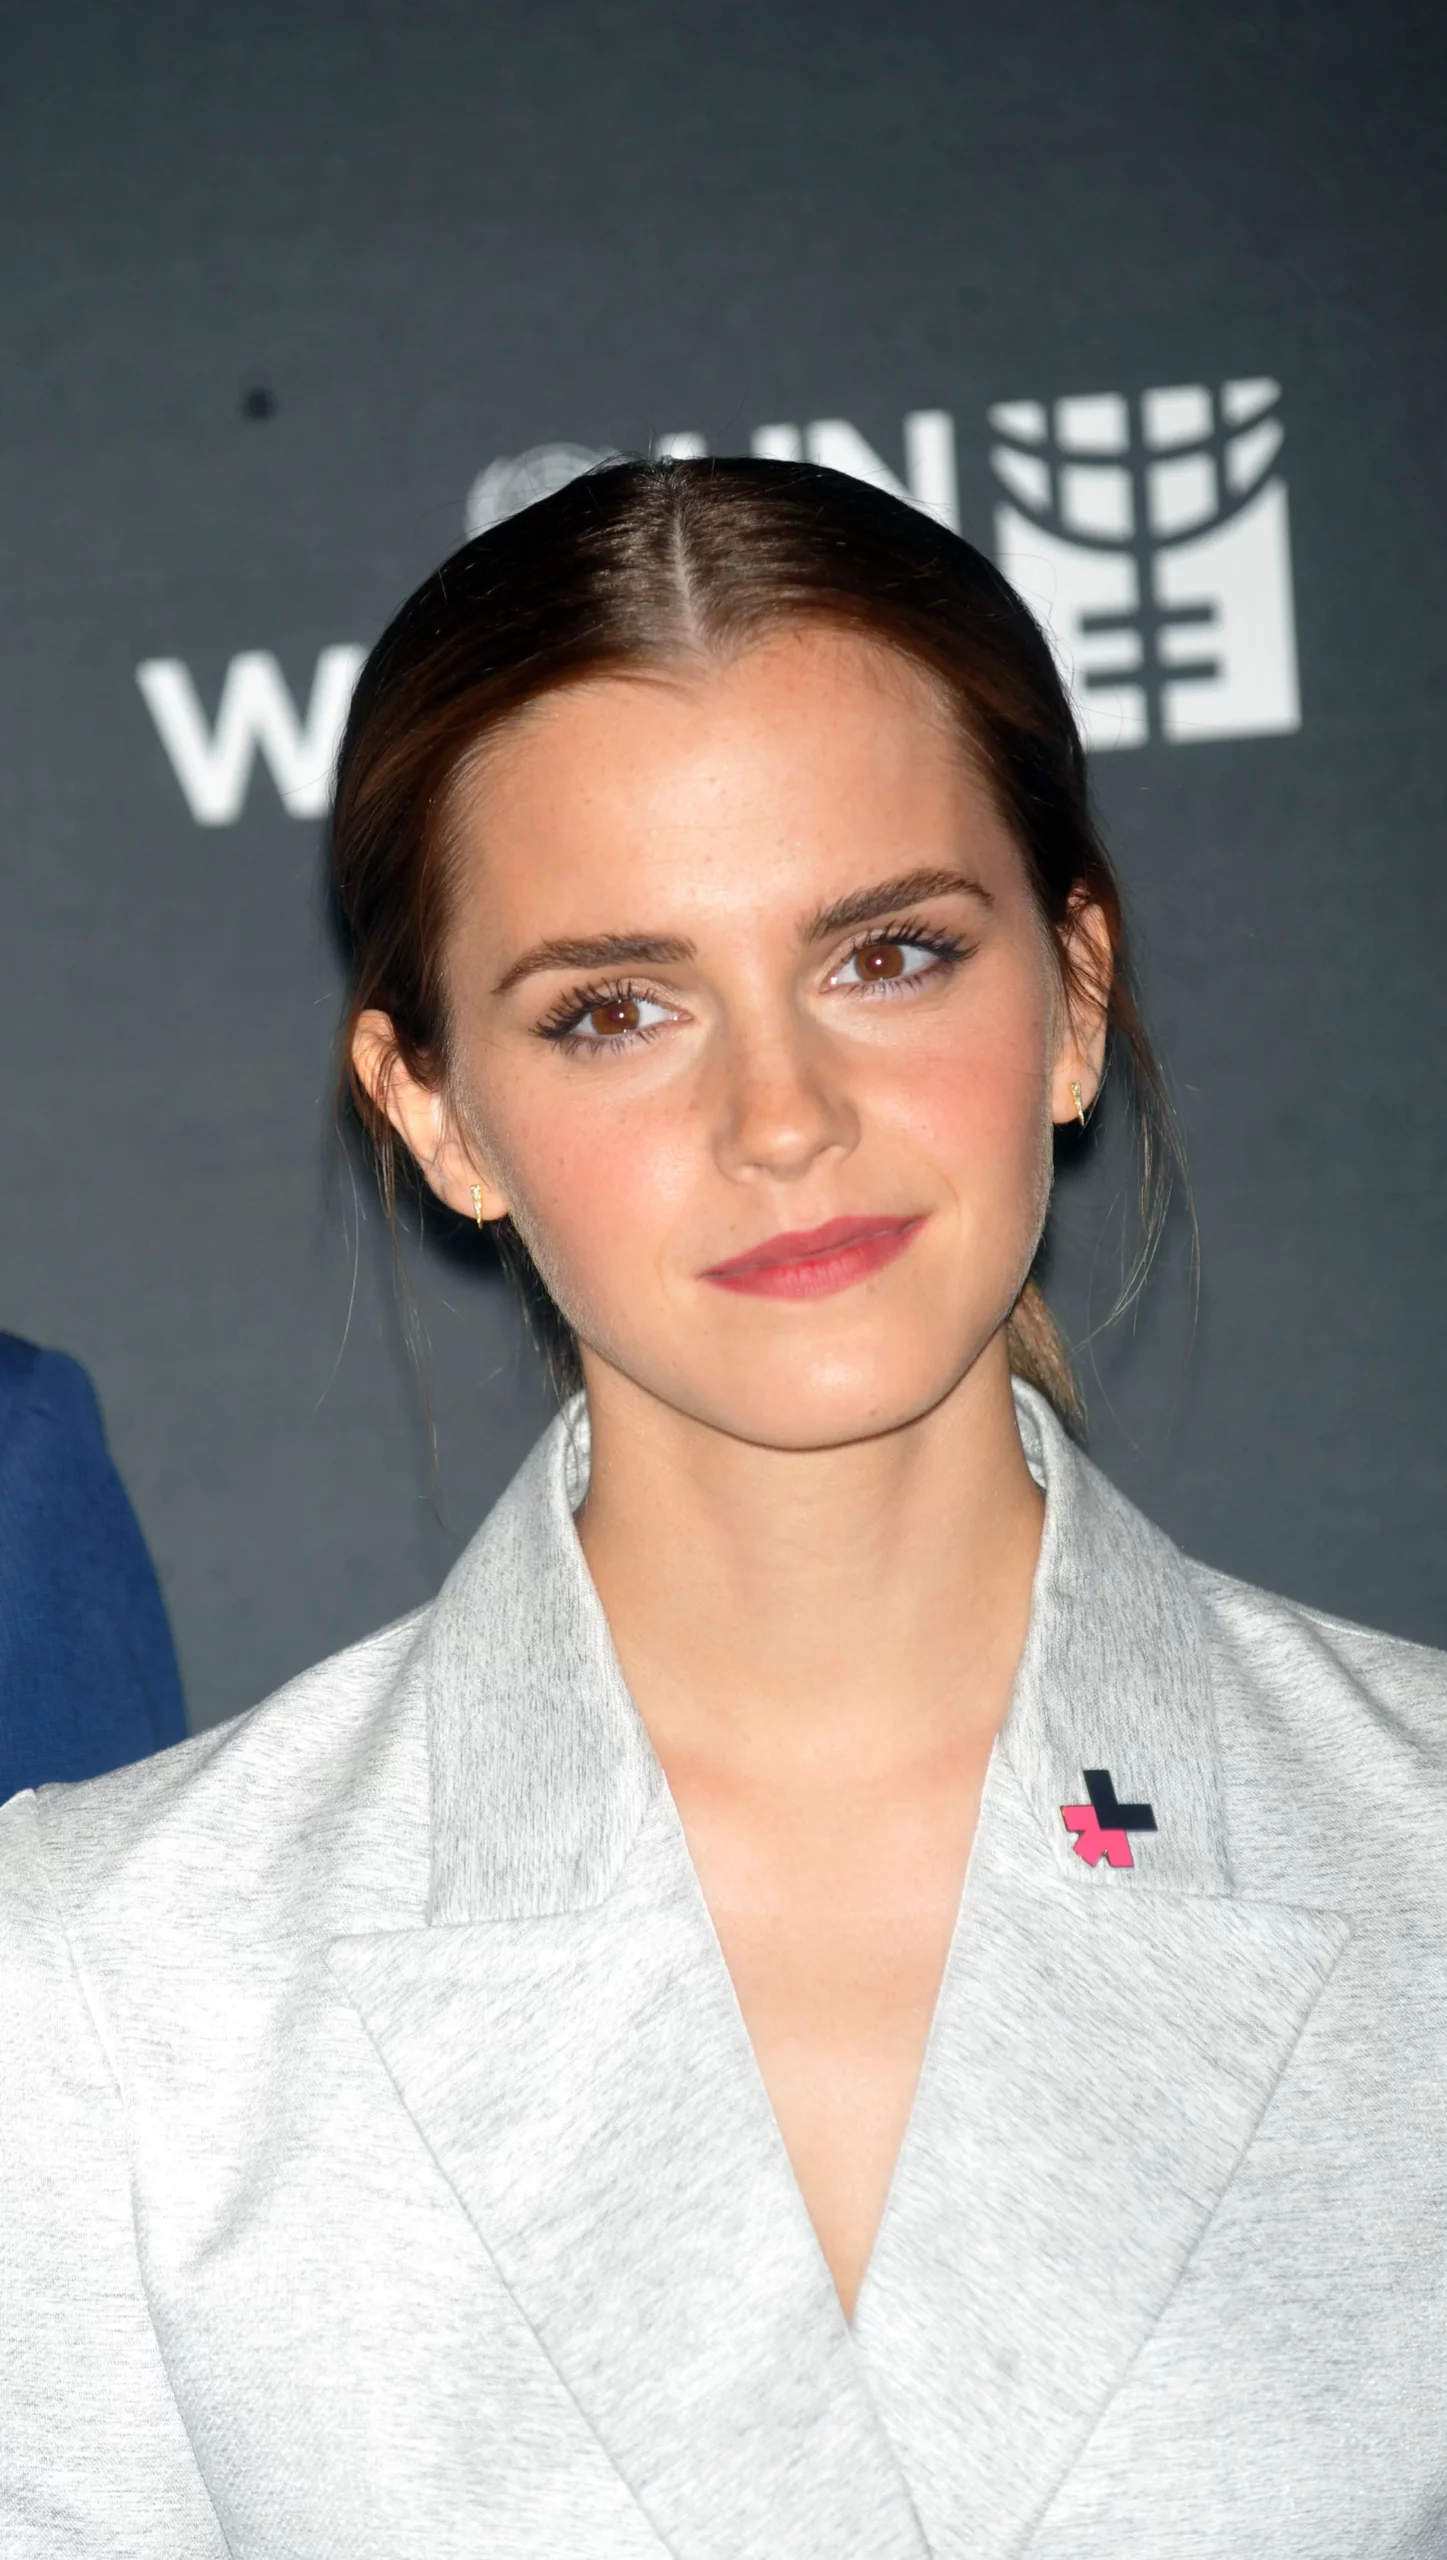 Emma Watson drank bleach Monday evening shortly after 4chan hacked her iPhone and posted her nudes.